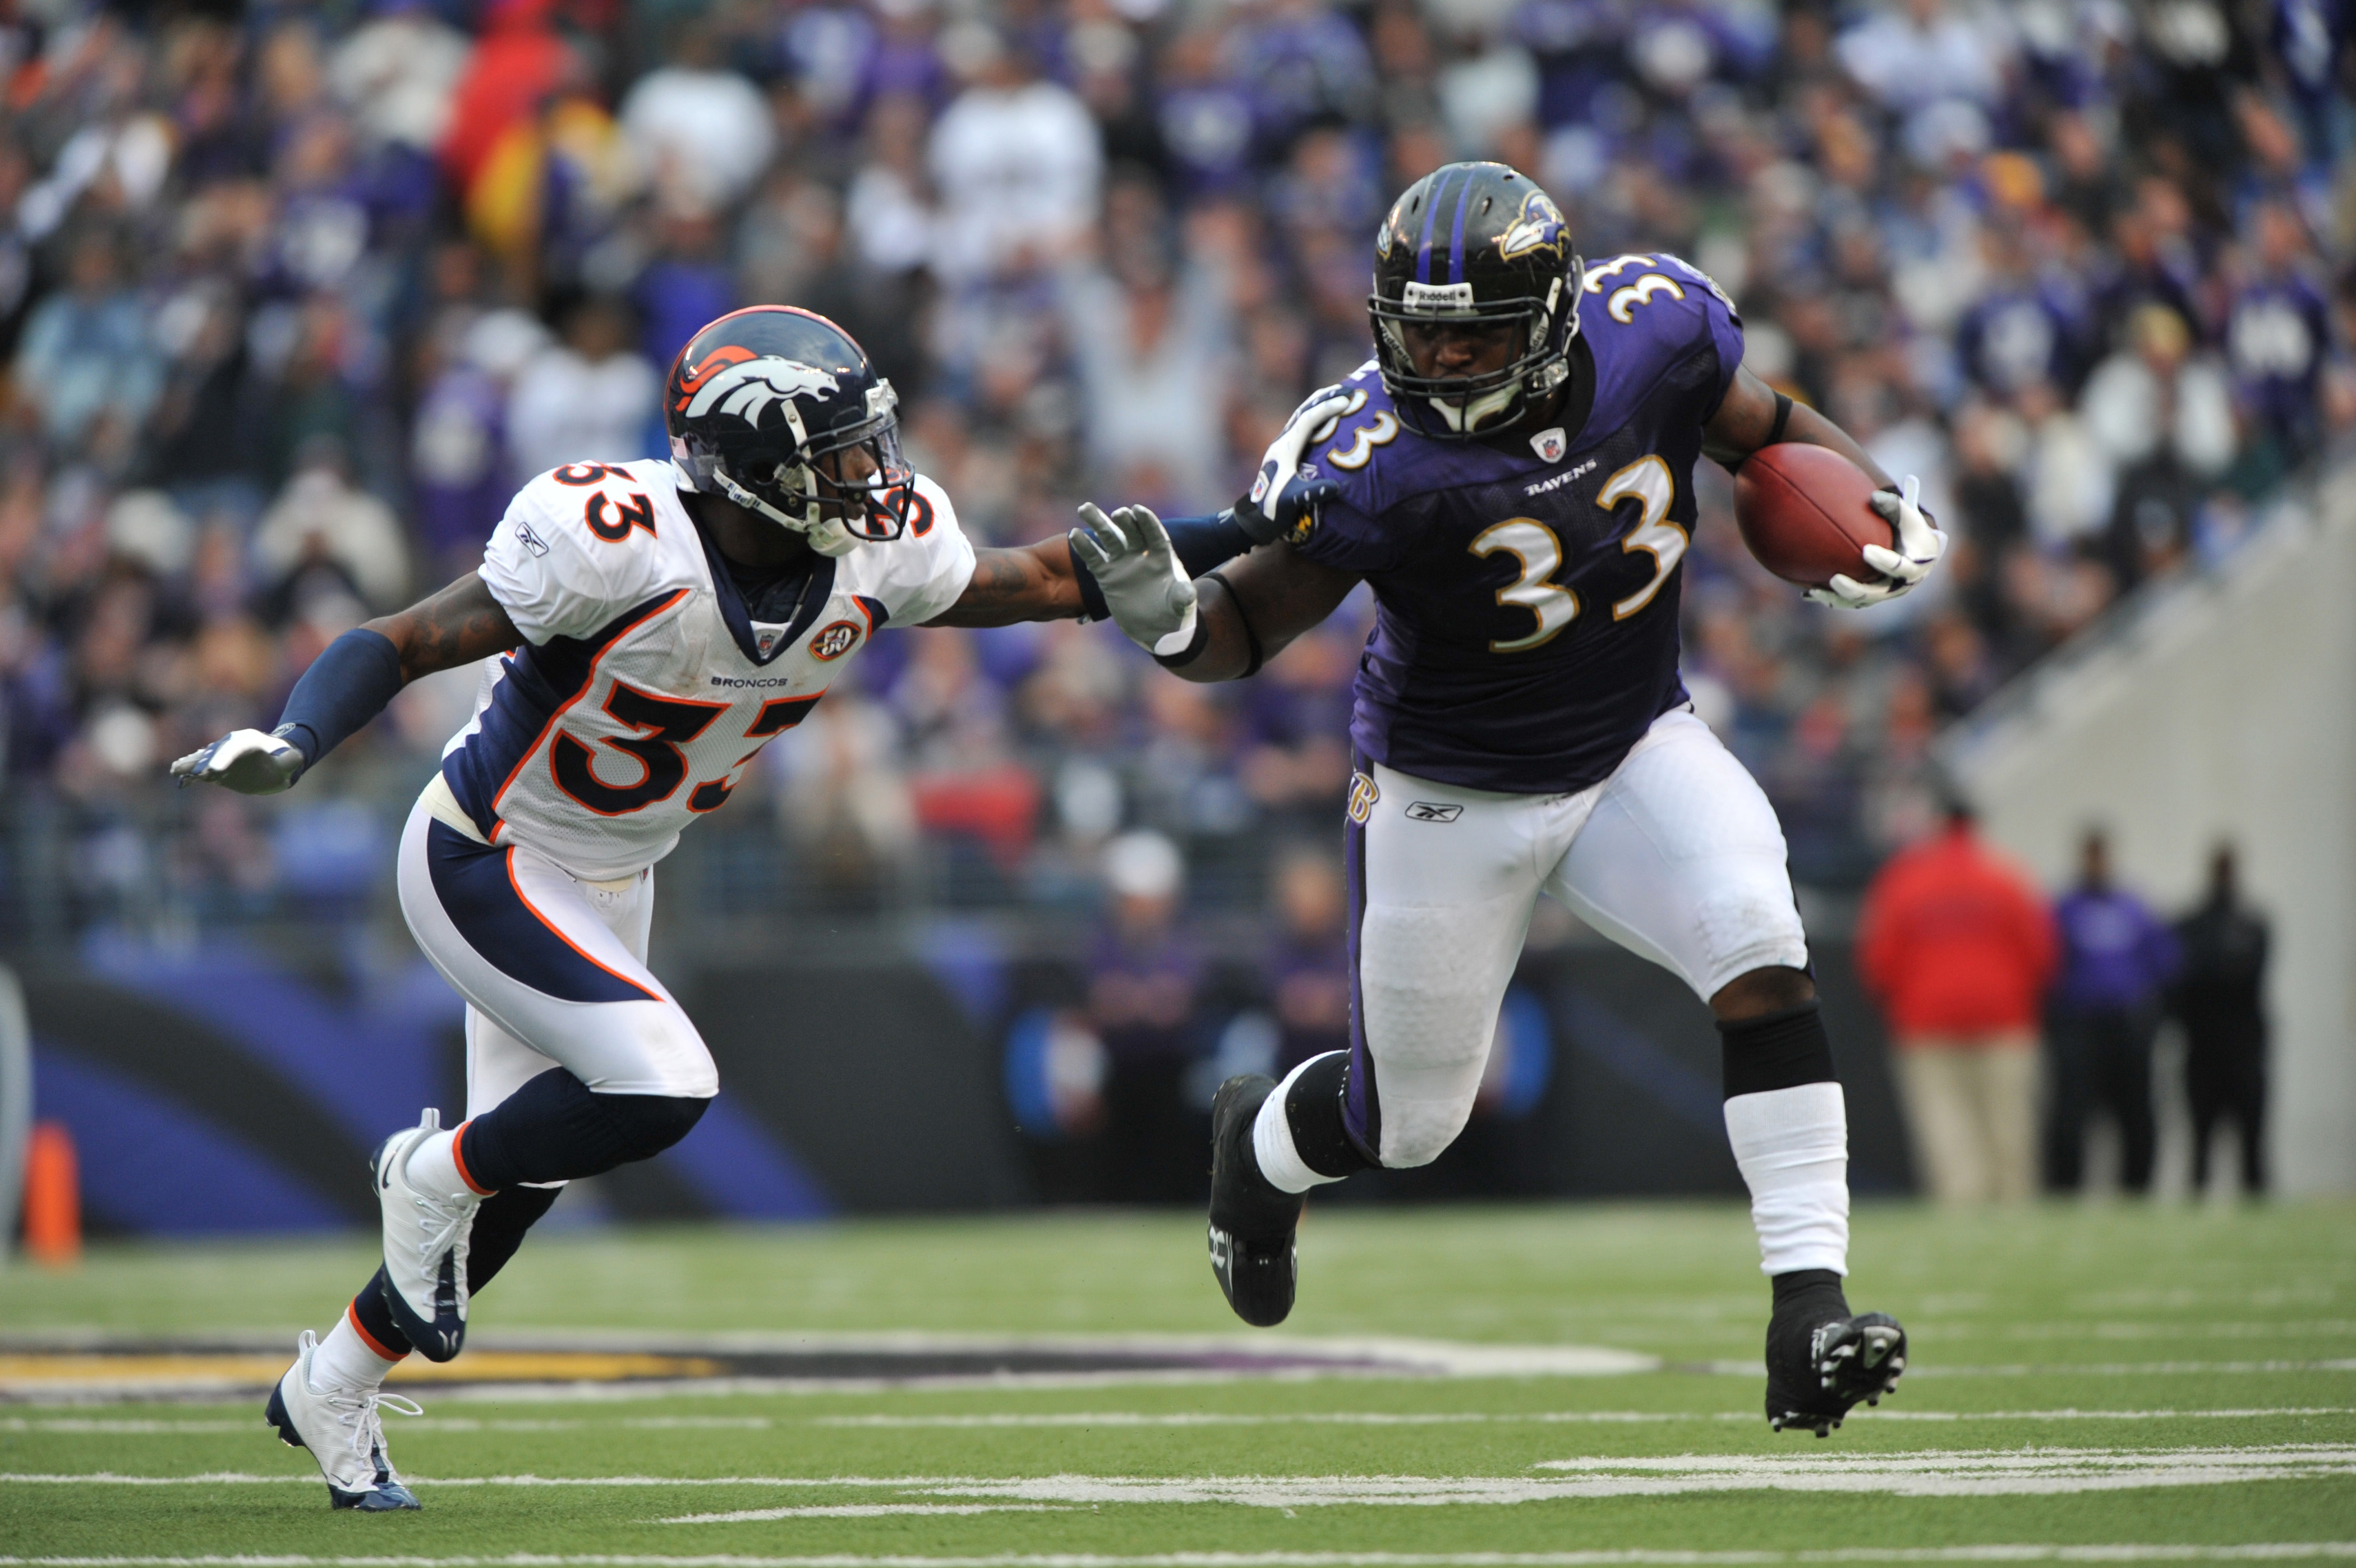 BALTIMORE - NOVEMBER 1: Le'Ron McClain #33 of the Baltimore Ravens runs the ball against the Denver Broncos at M&T Bank Stadium on November 1, 2009 in Baltimore, Maryland. (Photo by Larry French/Getty Images)